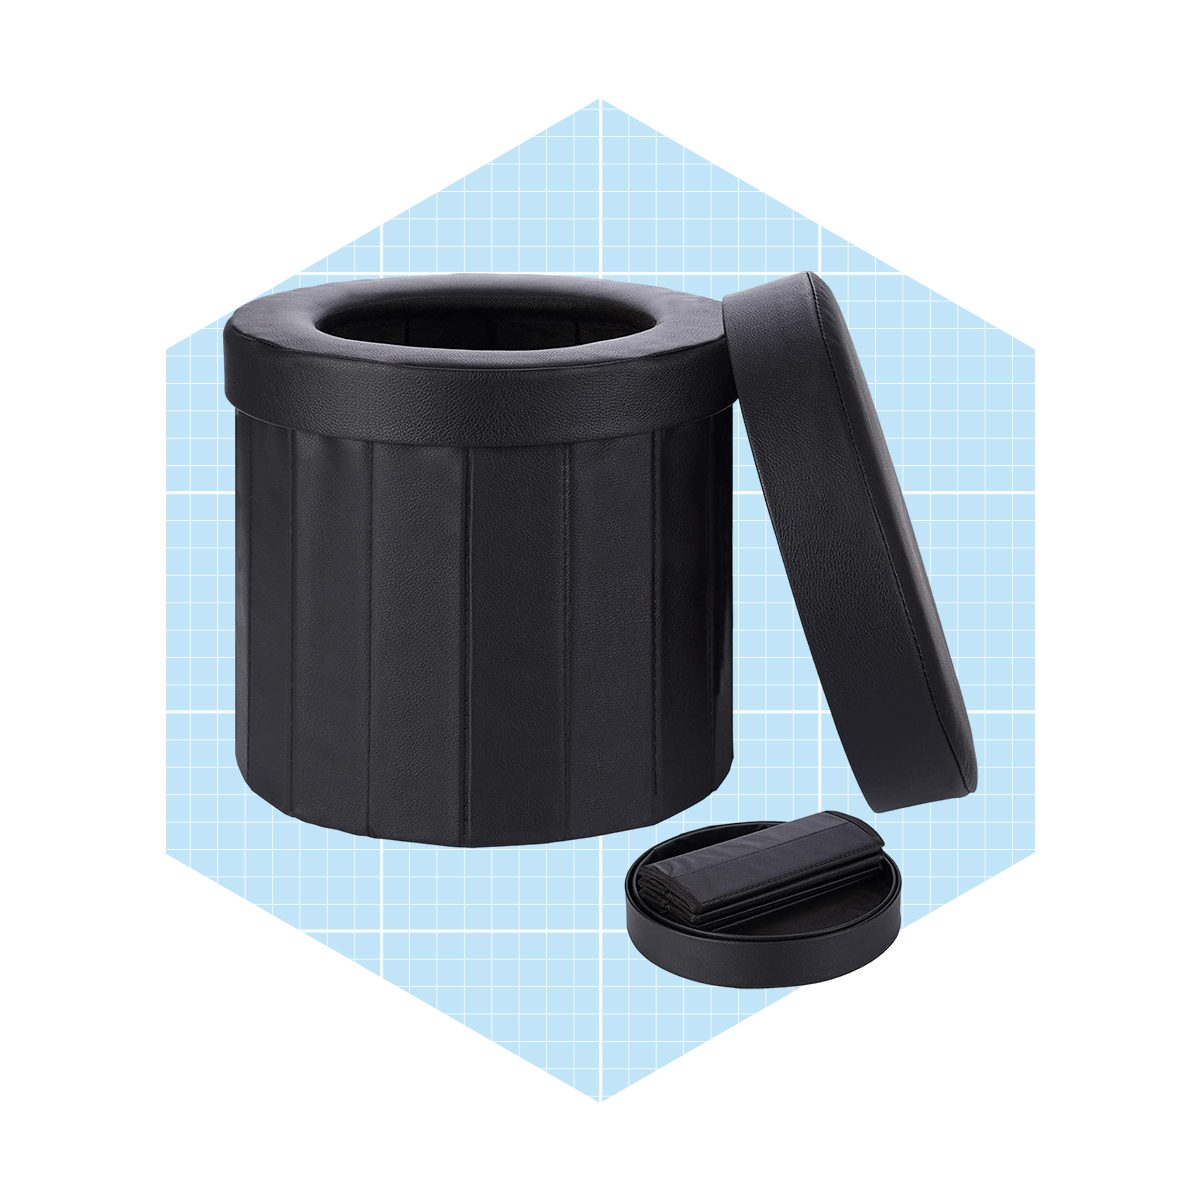 <p>It might not be the first thing that comes to mind, but the <a href="https://www.amazon.com/TRIPTIPS-Portable-Camping-Outdoor-Black-Round-2/dp/B07DZS5XRY" rel="noopener noreferrer">TripTips Portable Toilet</a> is definitely a road trip essential. This lightweight, compact poop shoot is only two inches thick when stored in its handy carrying bag, making it easy to stash in the trunk and carry along into the woods. Simply unfold the toilet, attach a plastic bag and do your business. Lastly, tie up the bag and trash it when you're done.</p> <p class="listicle-page__cta-button-shop"><a class="shop-btn" href="https://www.amazon.com/TRIPTIPS-Portable-Camping-Outdoor-Black-Round-2/dp/B07DZS5XRY">Shop Now</a></p>